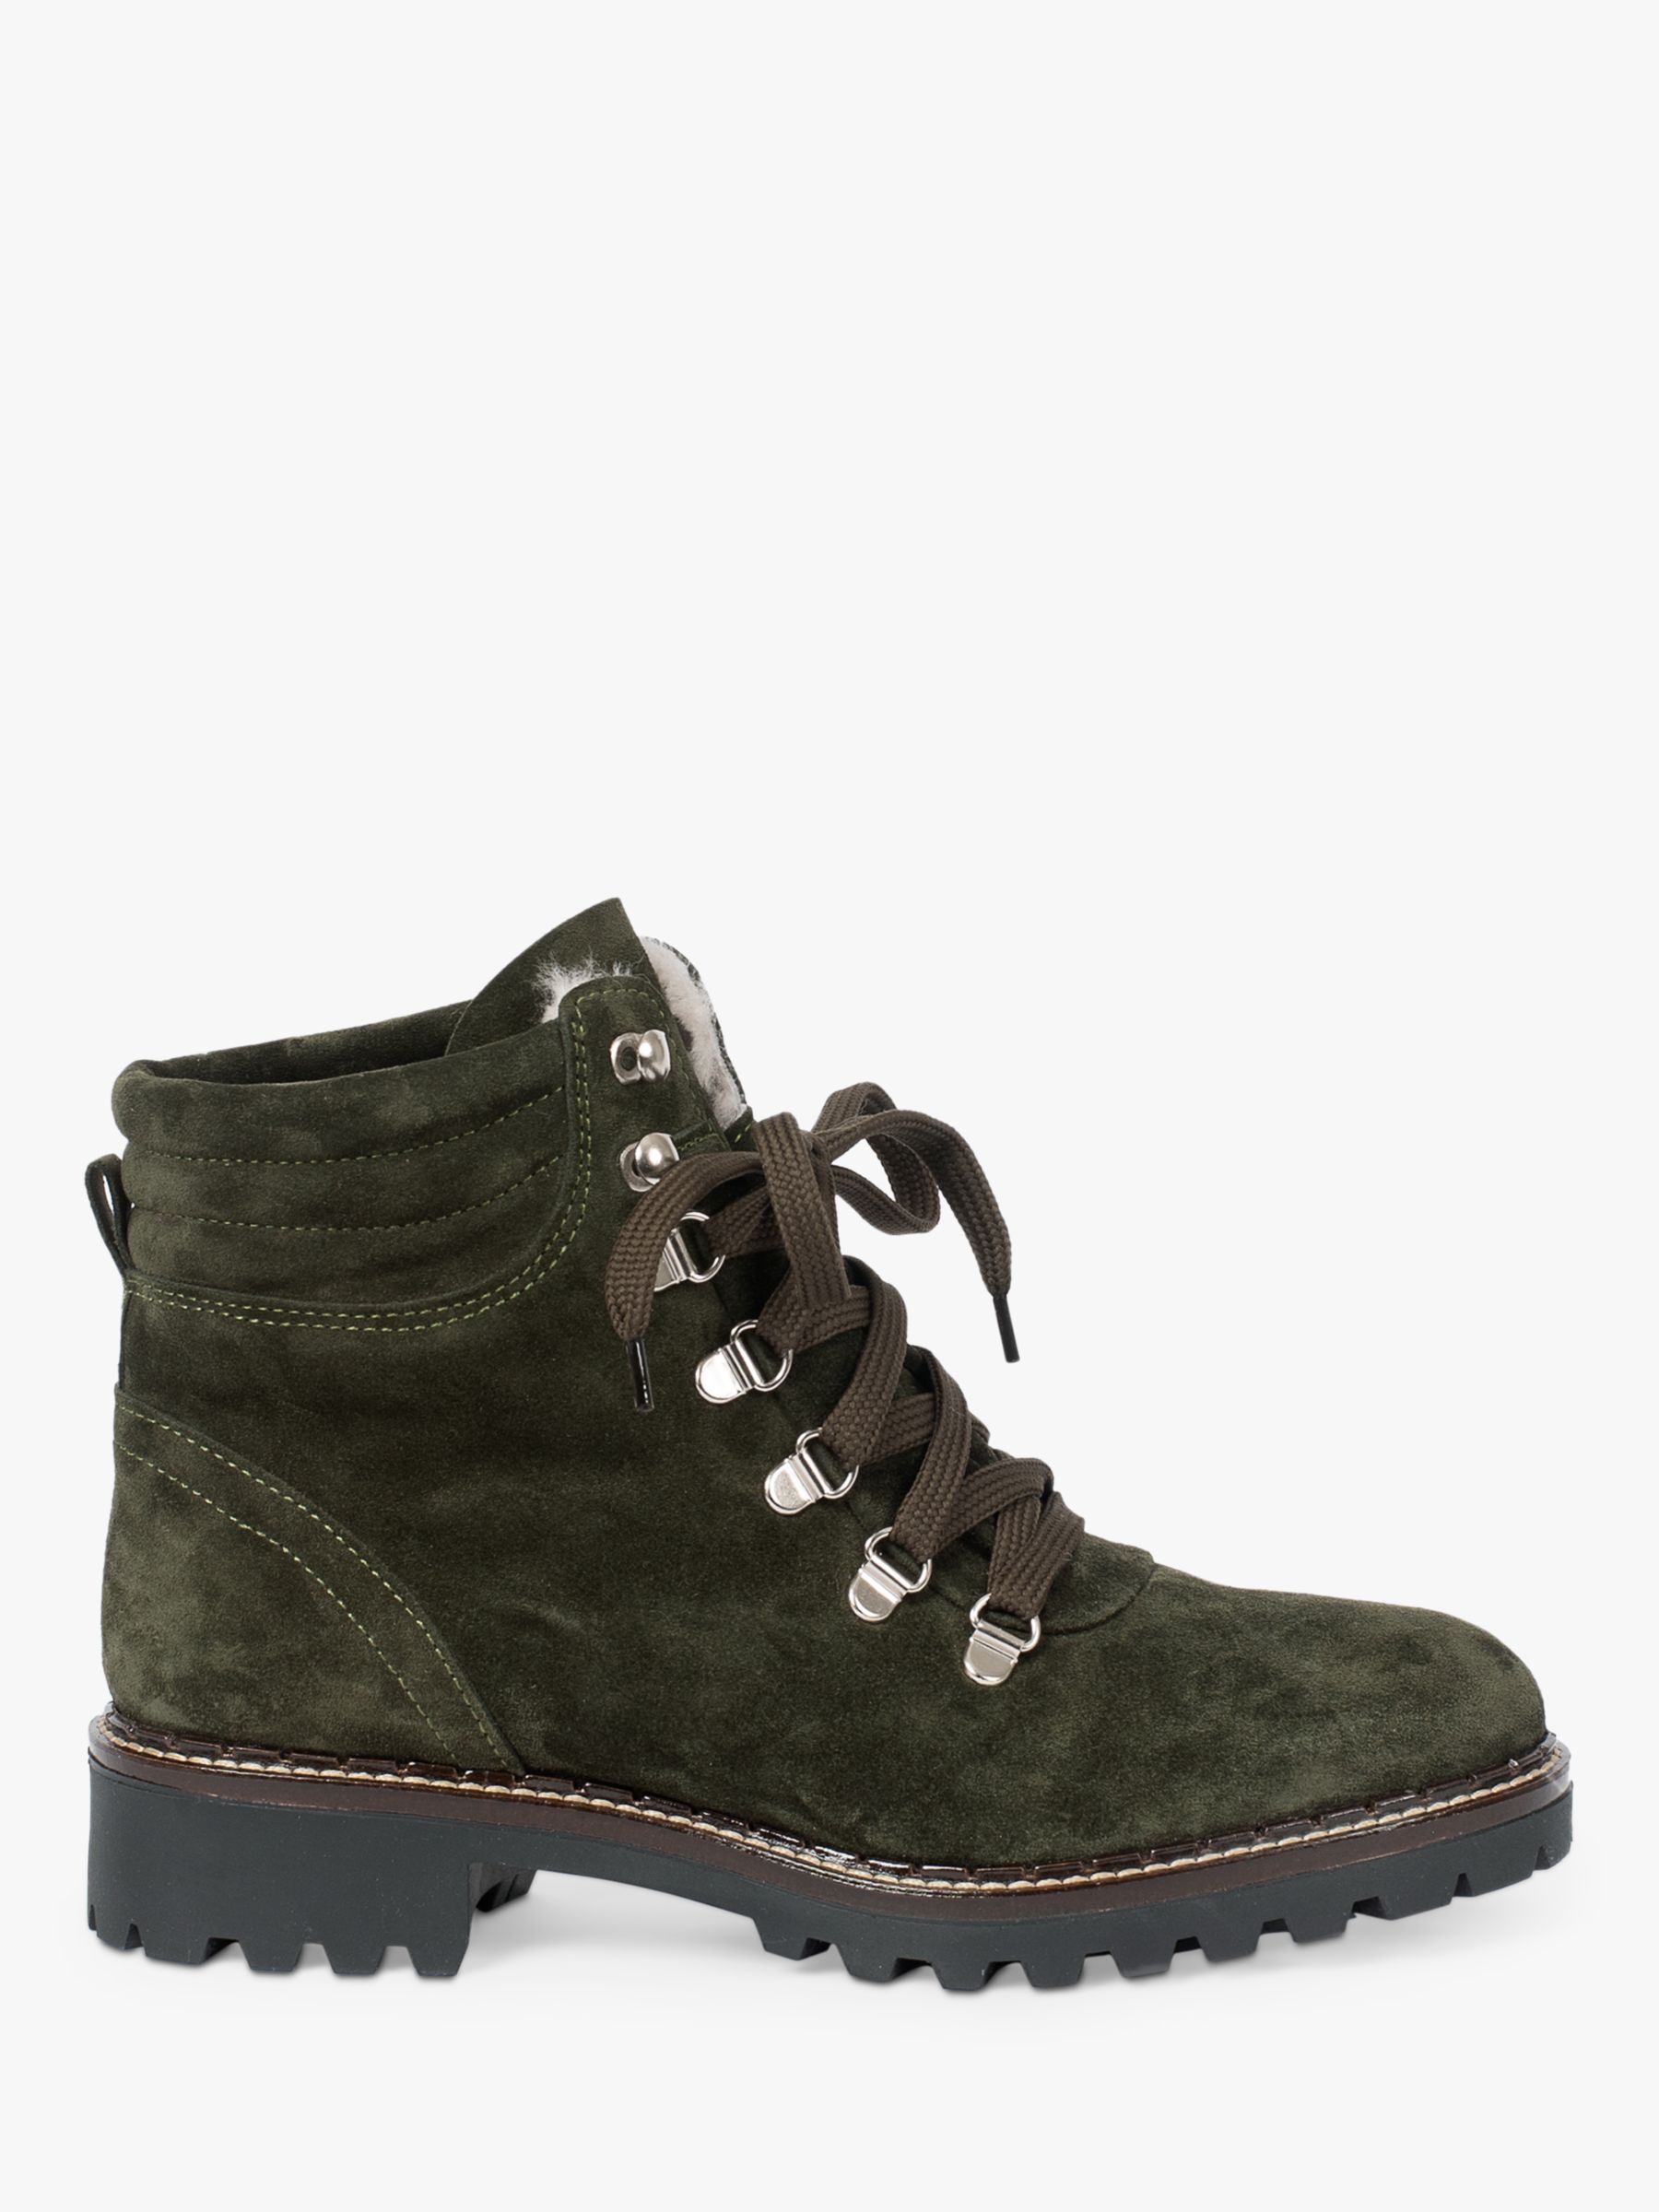 Celtic & Co. Suede Lace Up Hiker Boots, Olive at John Lewis & Partners